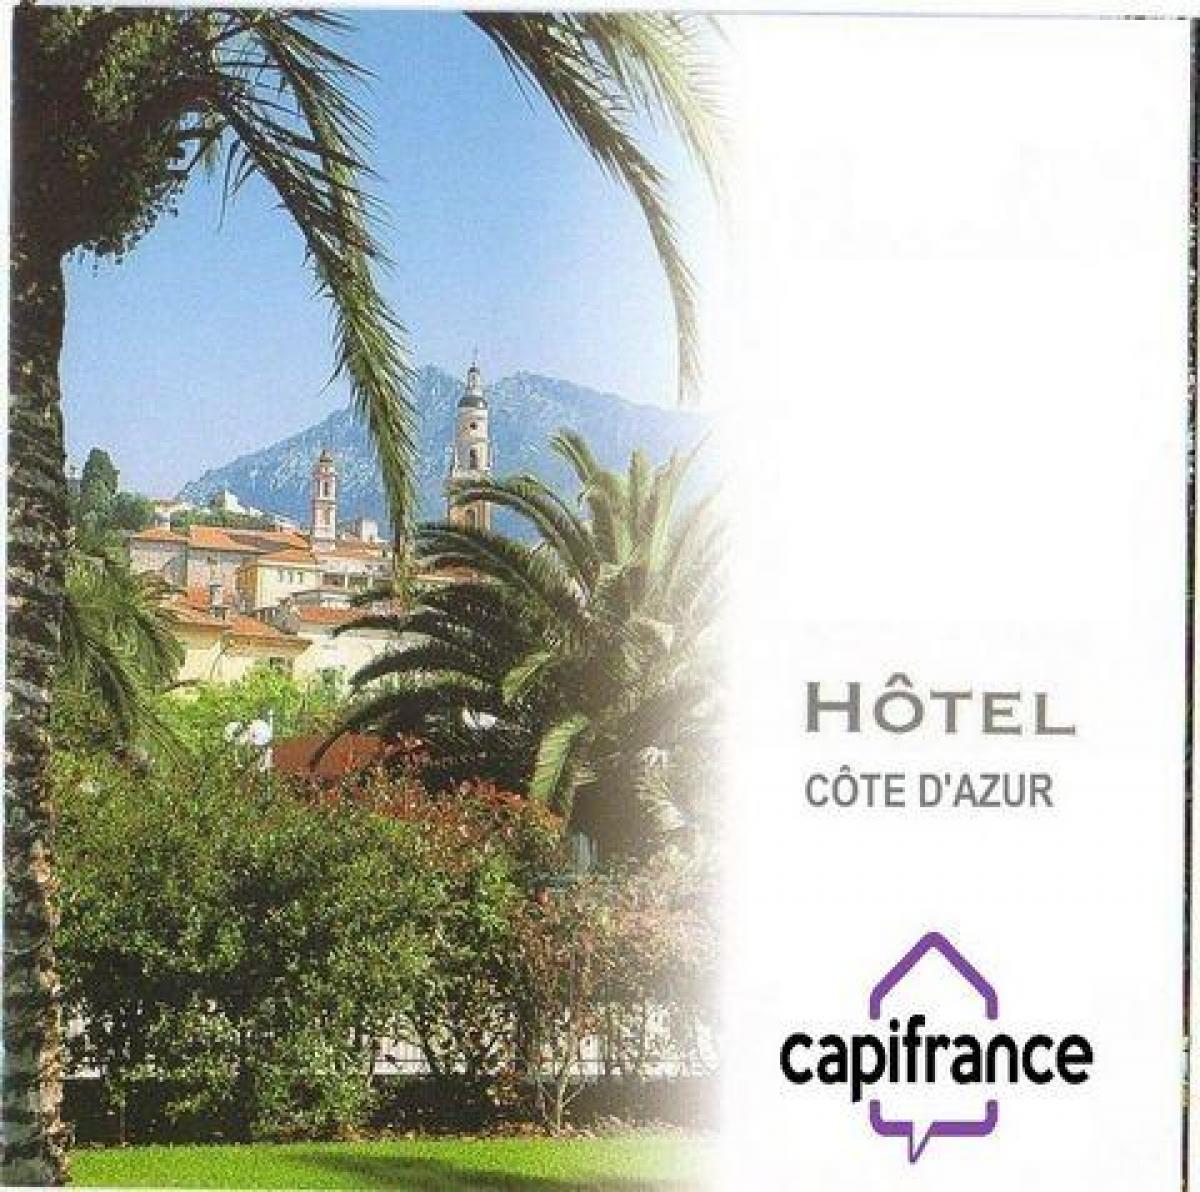 Picture of Office For Sale in Cagnes Sur Mer, Provence-Alpes-Cote d'Azur, France